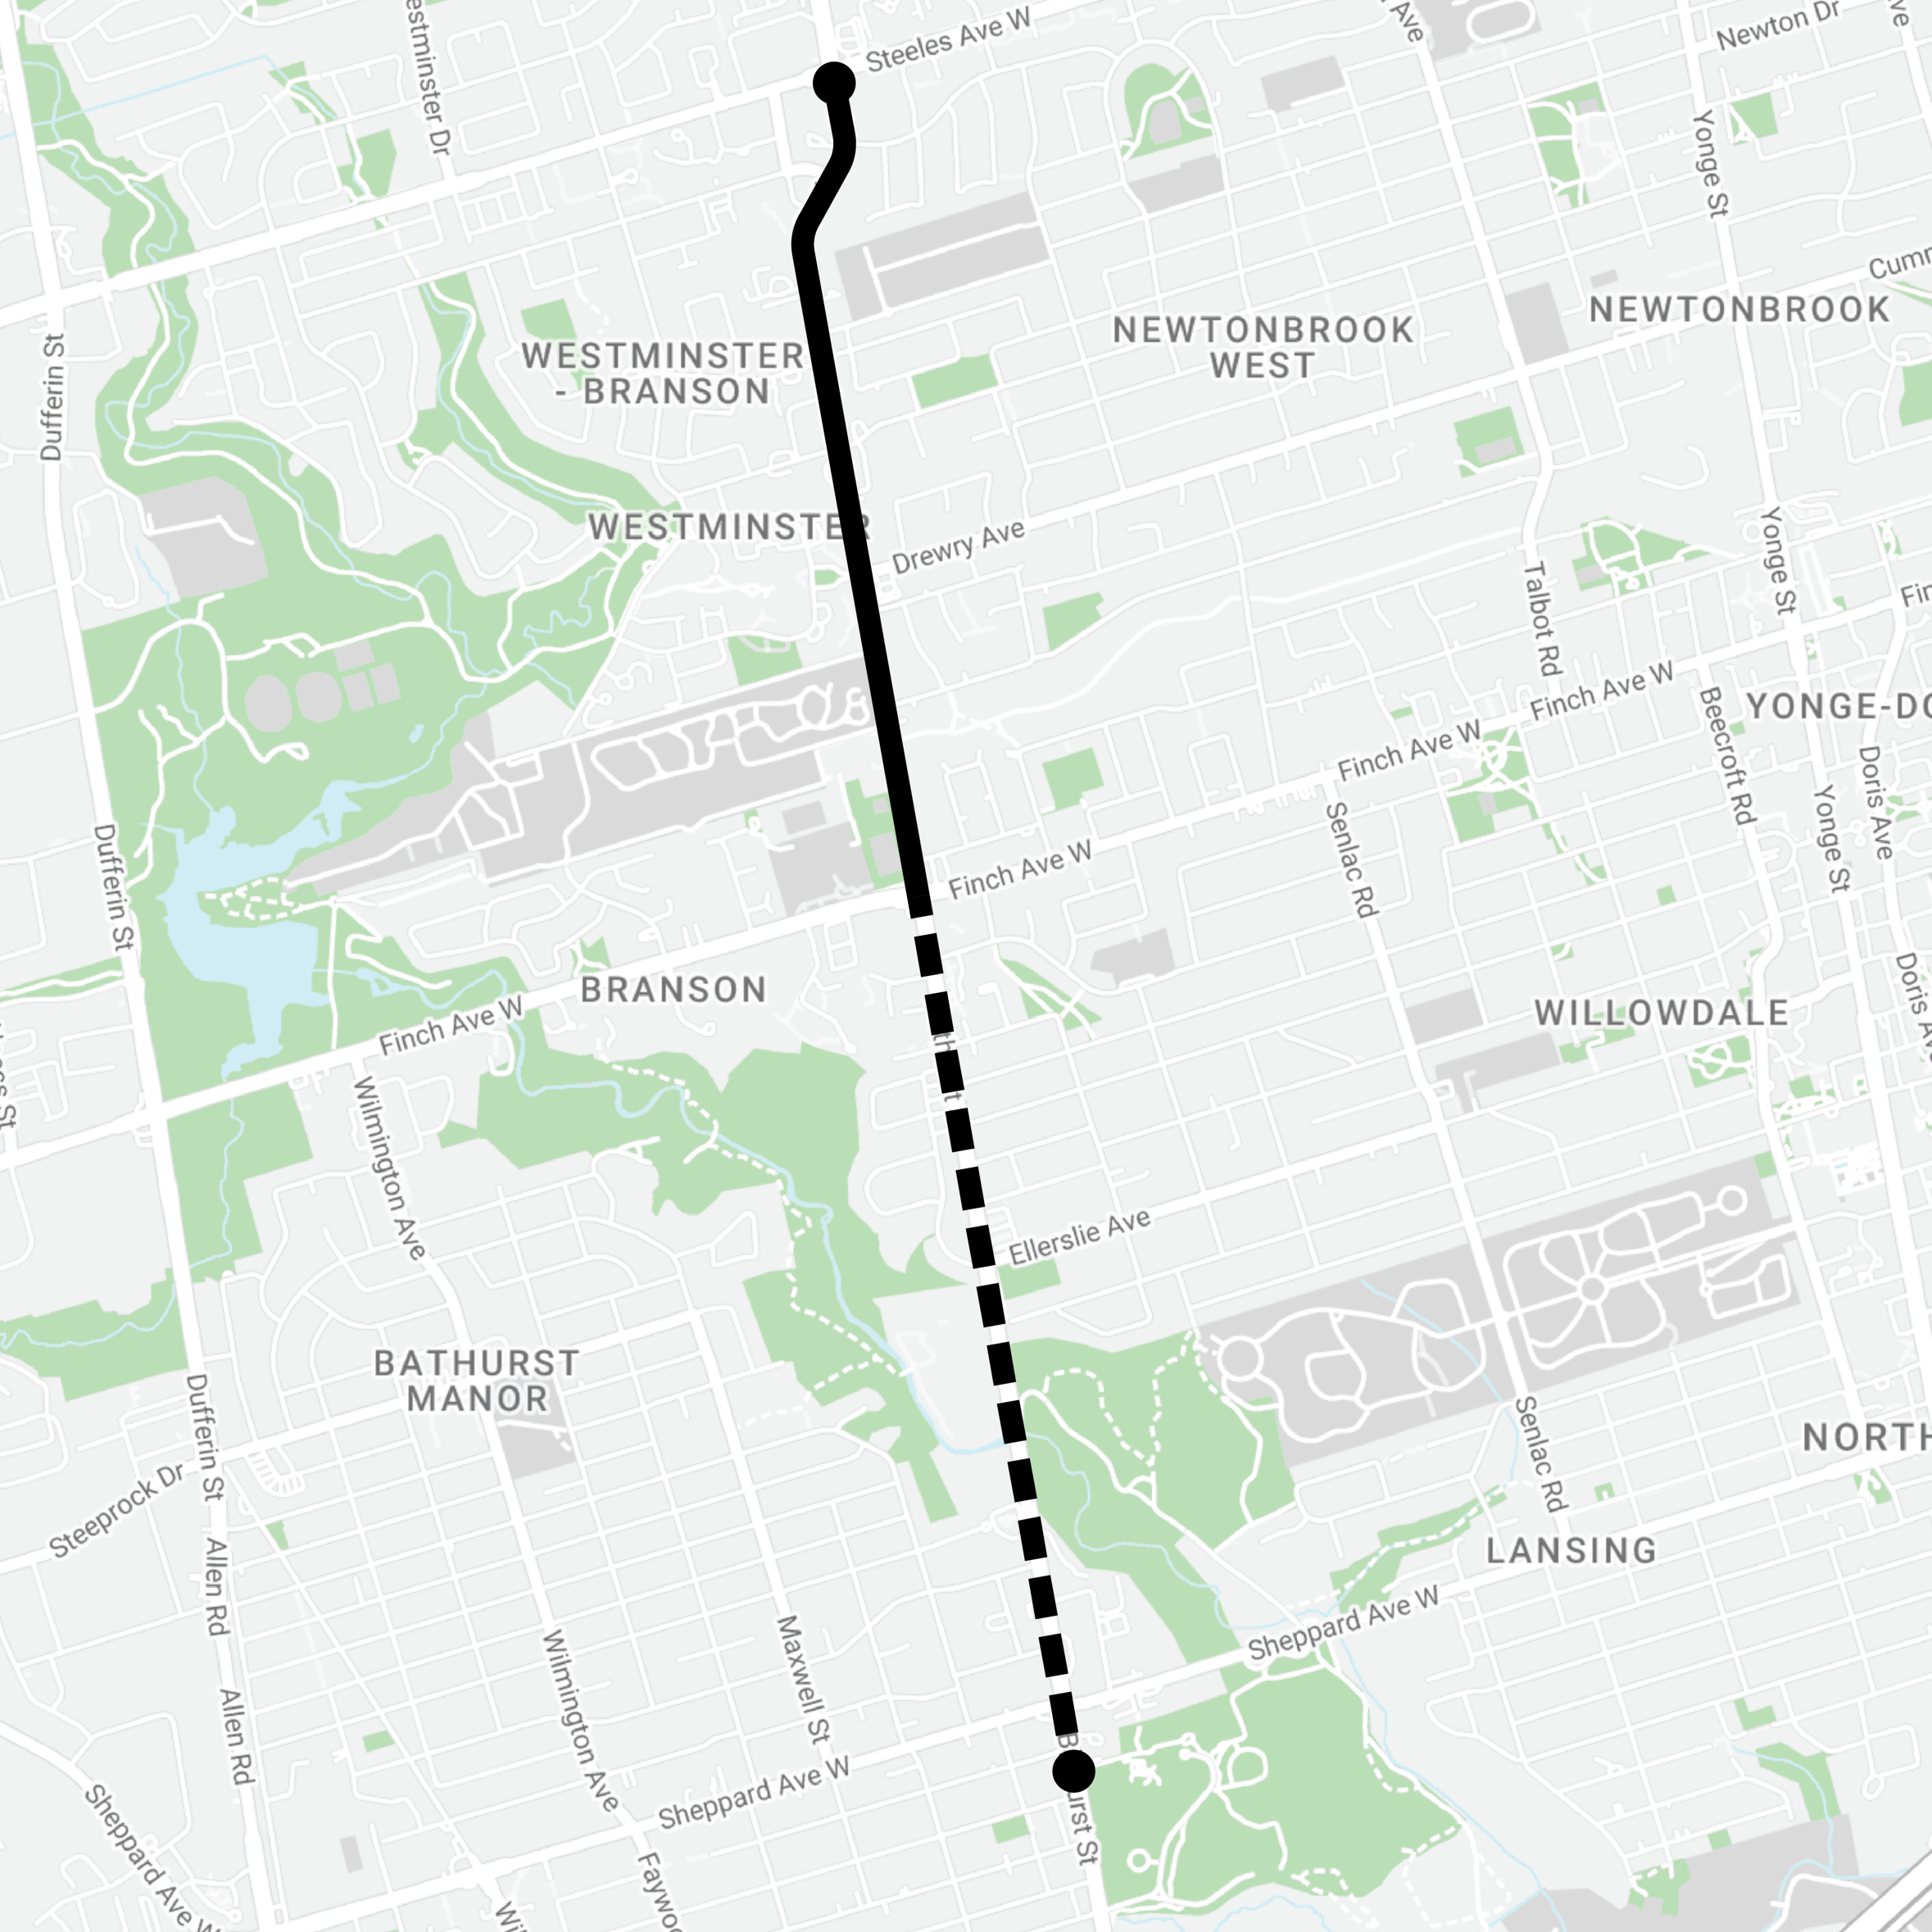 the image depicts the project area. It is bounded to the north by Steeles Avenue West, to the south by Bainbridge Avenue and to the east and west by Bathurst Street, on either sides.